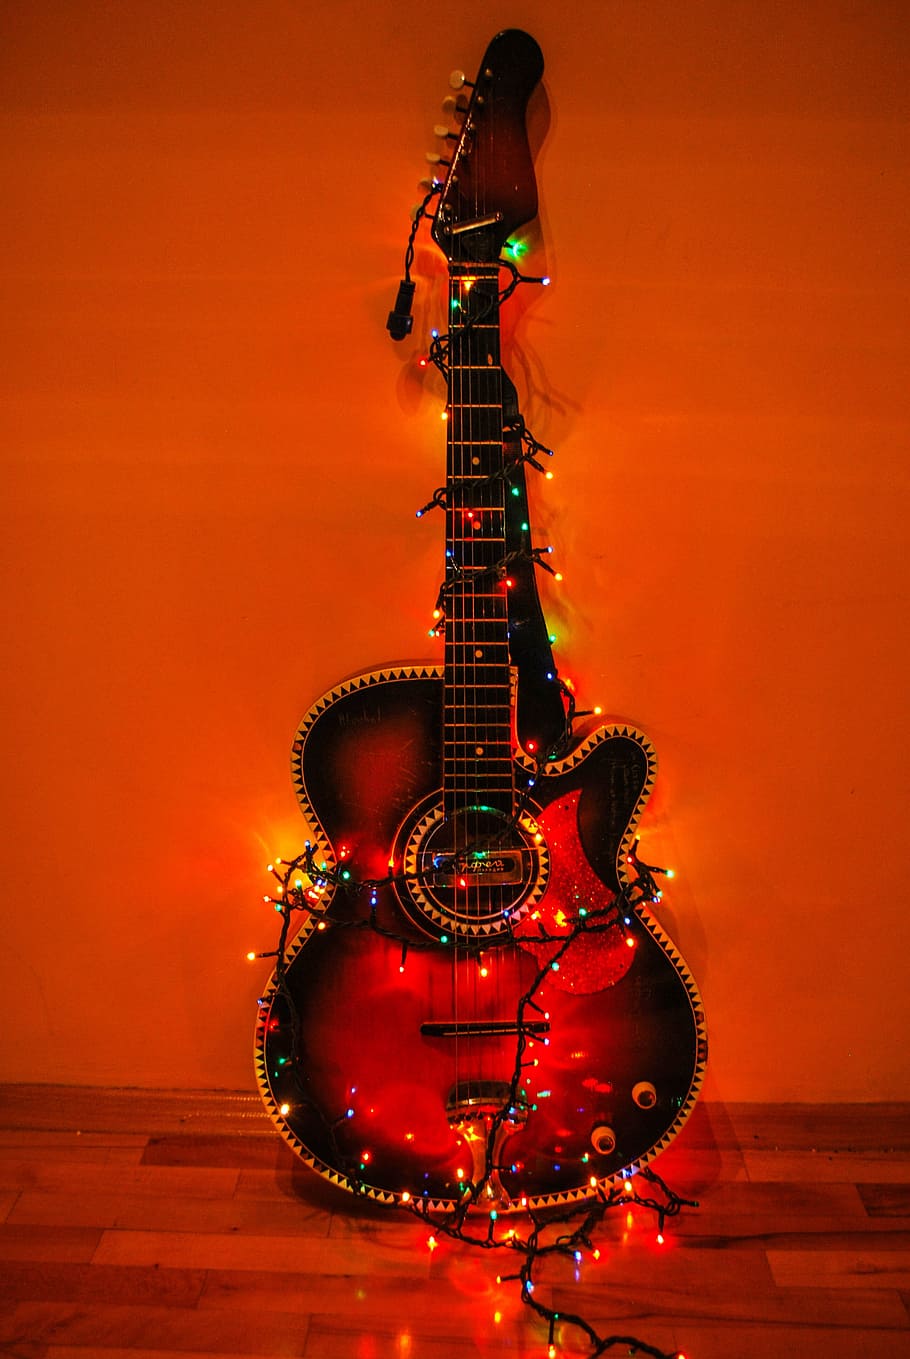 HD wallpaper: acoustic guitar surrounded with string lights against the  wall | Wallpaper Flare